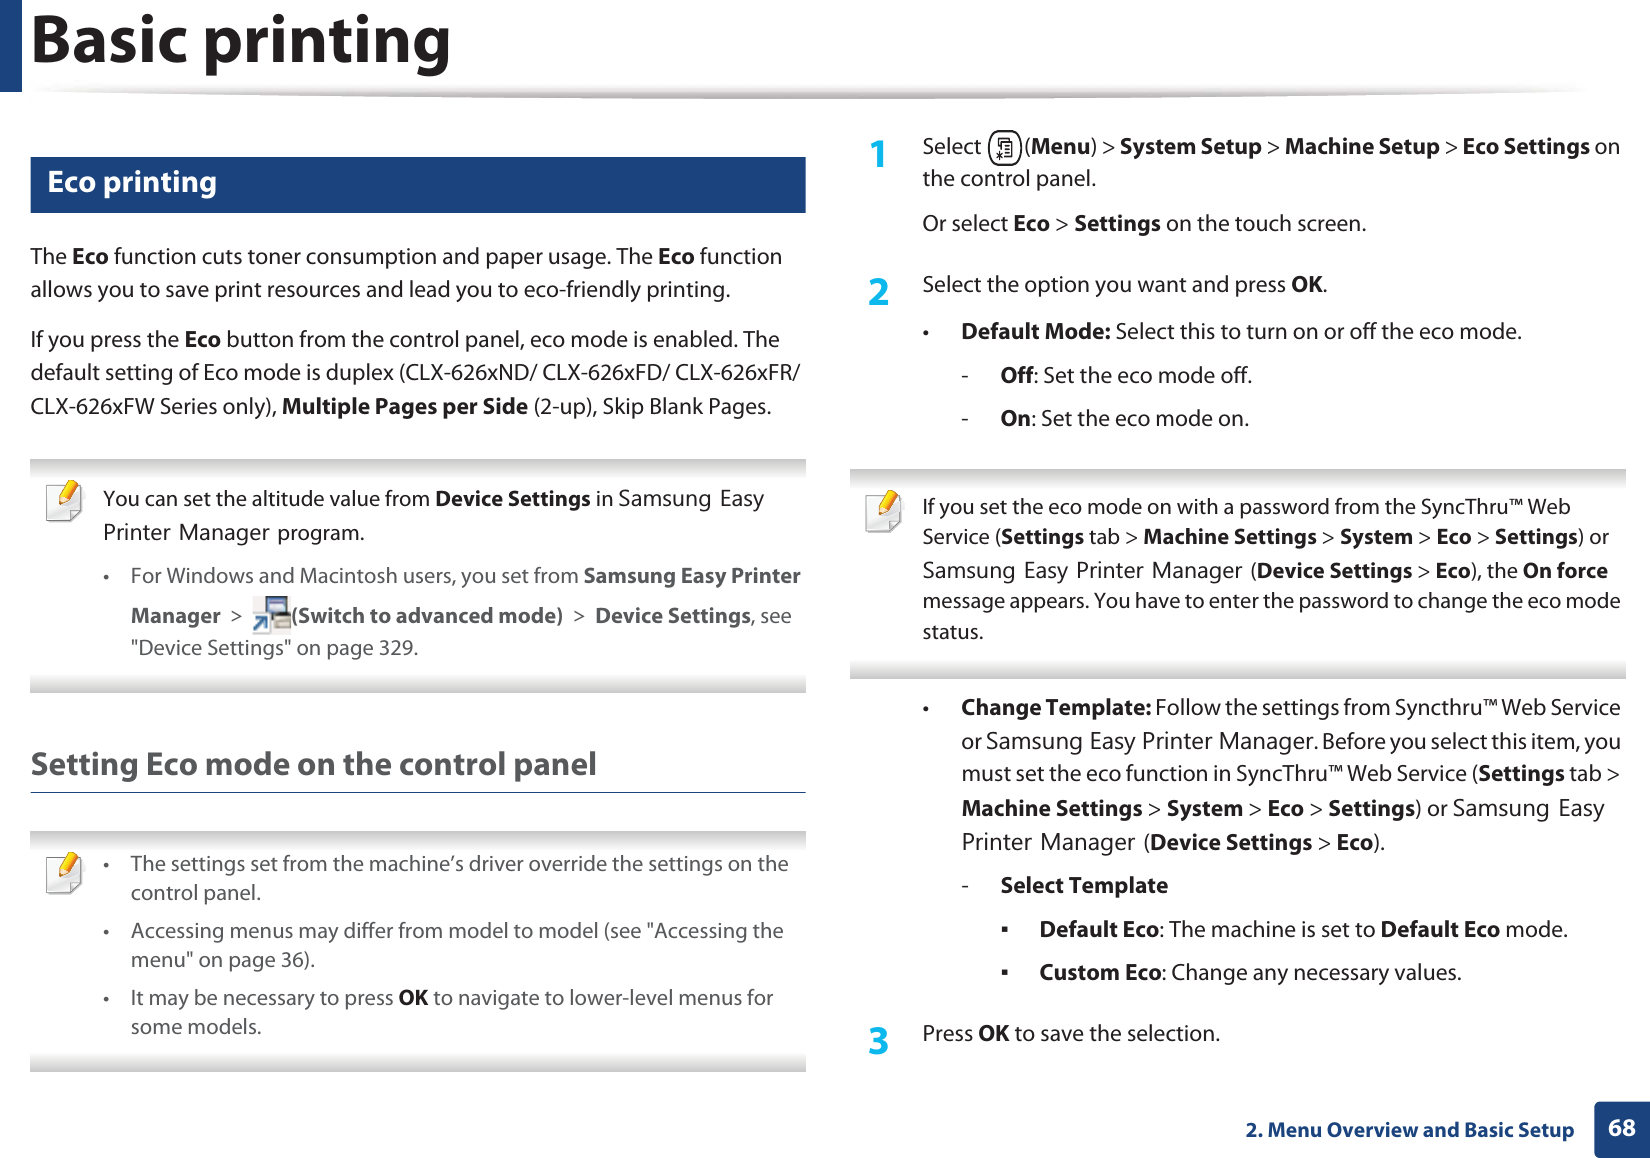 Basic printing682. Menu Overview and Basic Setup14 Eco printingThe Eco function cuts toner consumption and paper usage. The Eco function allows you to save print resources and lead you to eco-friendly printing.If you press the Eco button from the control panel, eco mode is enabled. The default setting of Eco mode is duplex (CLX-626xND/ CLX-626xFD/ CLX-626xFR/ CLX-626xFW Series only), Multiple Pages per Side (2-up), Skip Blank Pages. You can set the altitude value from Device Settings in 6DPVXQJ(DV\3ULQWHU0DQDJHUprogram.• For Windows and Macintosh users, you set from Samsung Easy Printer Manager! (Switch to advanced mode)!Device Settings, see &quot;Device Settings&quot; on page 329. Setting Eco mode on the control panel • The settings set from the machine’s driver override the settings on the control panel.• Accessing menus may differ from model to model (see &quot;Accessing the menu&quot; on page 36).• It may be necessary to press OK to navigate to lower-level menus for some models. 1Select (Menu) &gt; System Setup &gt; Machine Setup &gt; Eco Settings on the control panel.Or select Eco &gt; Settings on the touch screen.2  Select the option you want and press OK.•Default Mode: Select this to turn on or off the eco mode.-Off: Set the eco mode off.-On: Set the eco mode on. If you set the eco mode on with a password from the SyncThru™ Web Service (Settings tab &gt; Machine Settings &gt; System &gt; Eco &gt; Settings) or 6DPVXQJ(DV\3ULQWHU0DQDJHU(Device Settings &gt; Eco), the On force message appears. You have to enter the password to change the eco mode status. •Change Template: Follow the settings from Syncthru™ Web Service or 6DPVXQJ(DV\3ULQWHU0DQDJHU. Before you select this item, you must set the eco function in SyncThru™ Web Service (Settings tab &gt; Machine Settings &gt; System &gt; Eco &gt; Settings) or 6DPVXQJ(DV\3ULQWHU0DQDJHU(Device Settings &gt; Eco). -Select TemplateƒDefault Eco: The machine is set to Default Eco mode.ƒCustom Eco: Change any necessary values.3  Press OK to save the selection.